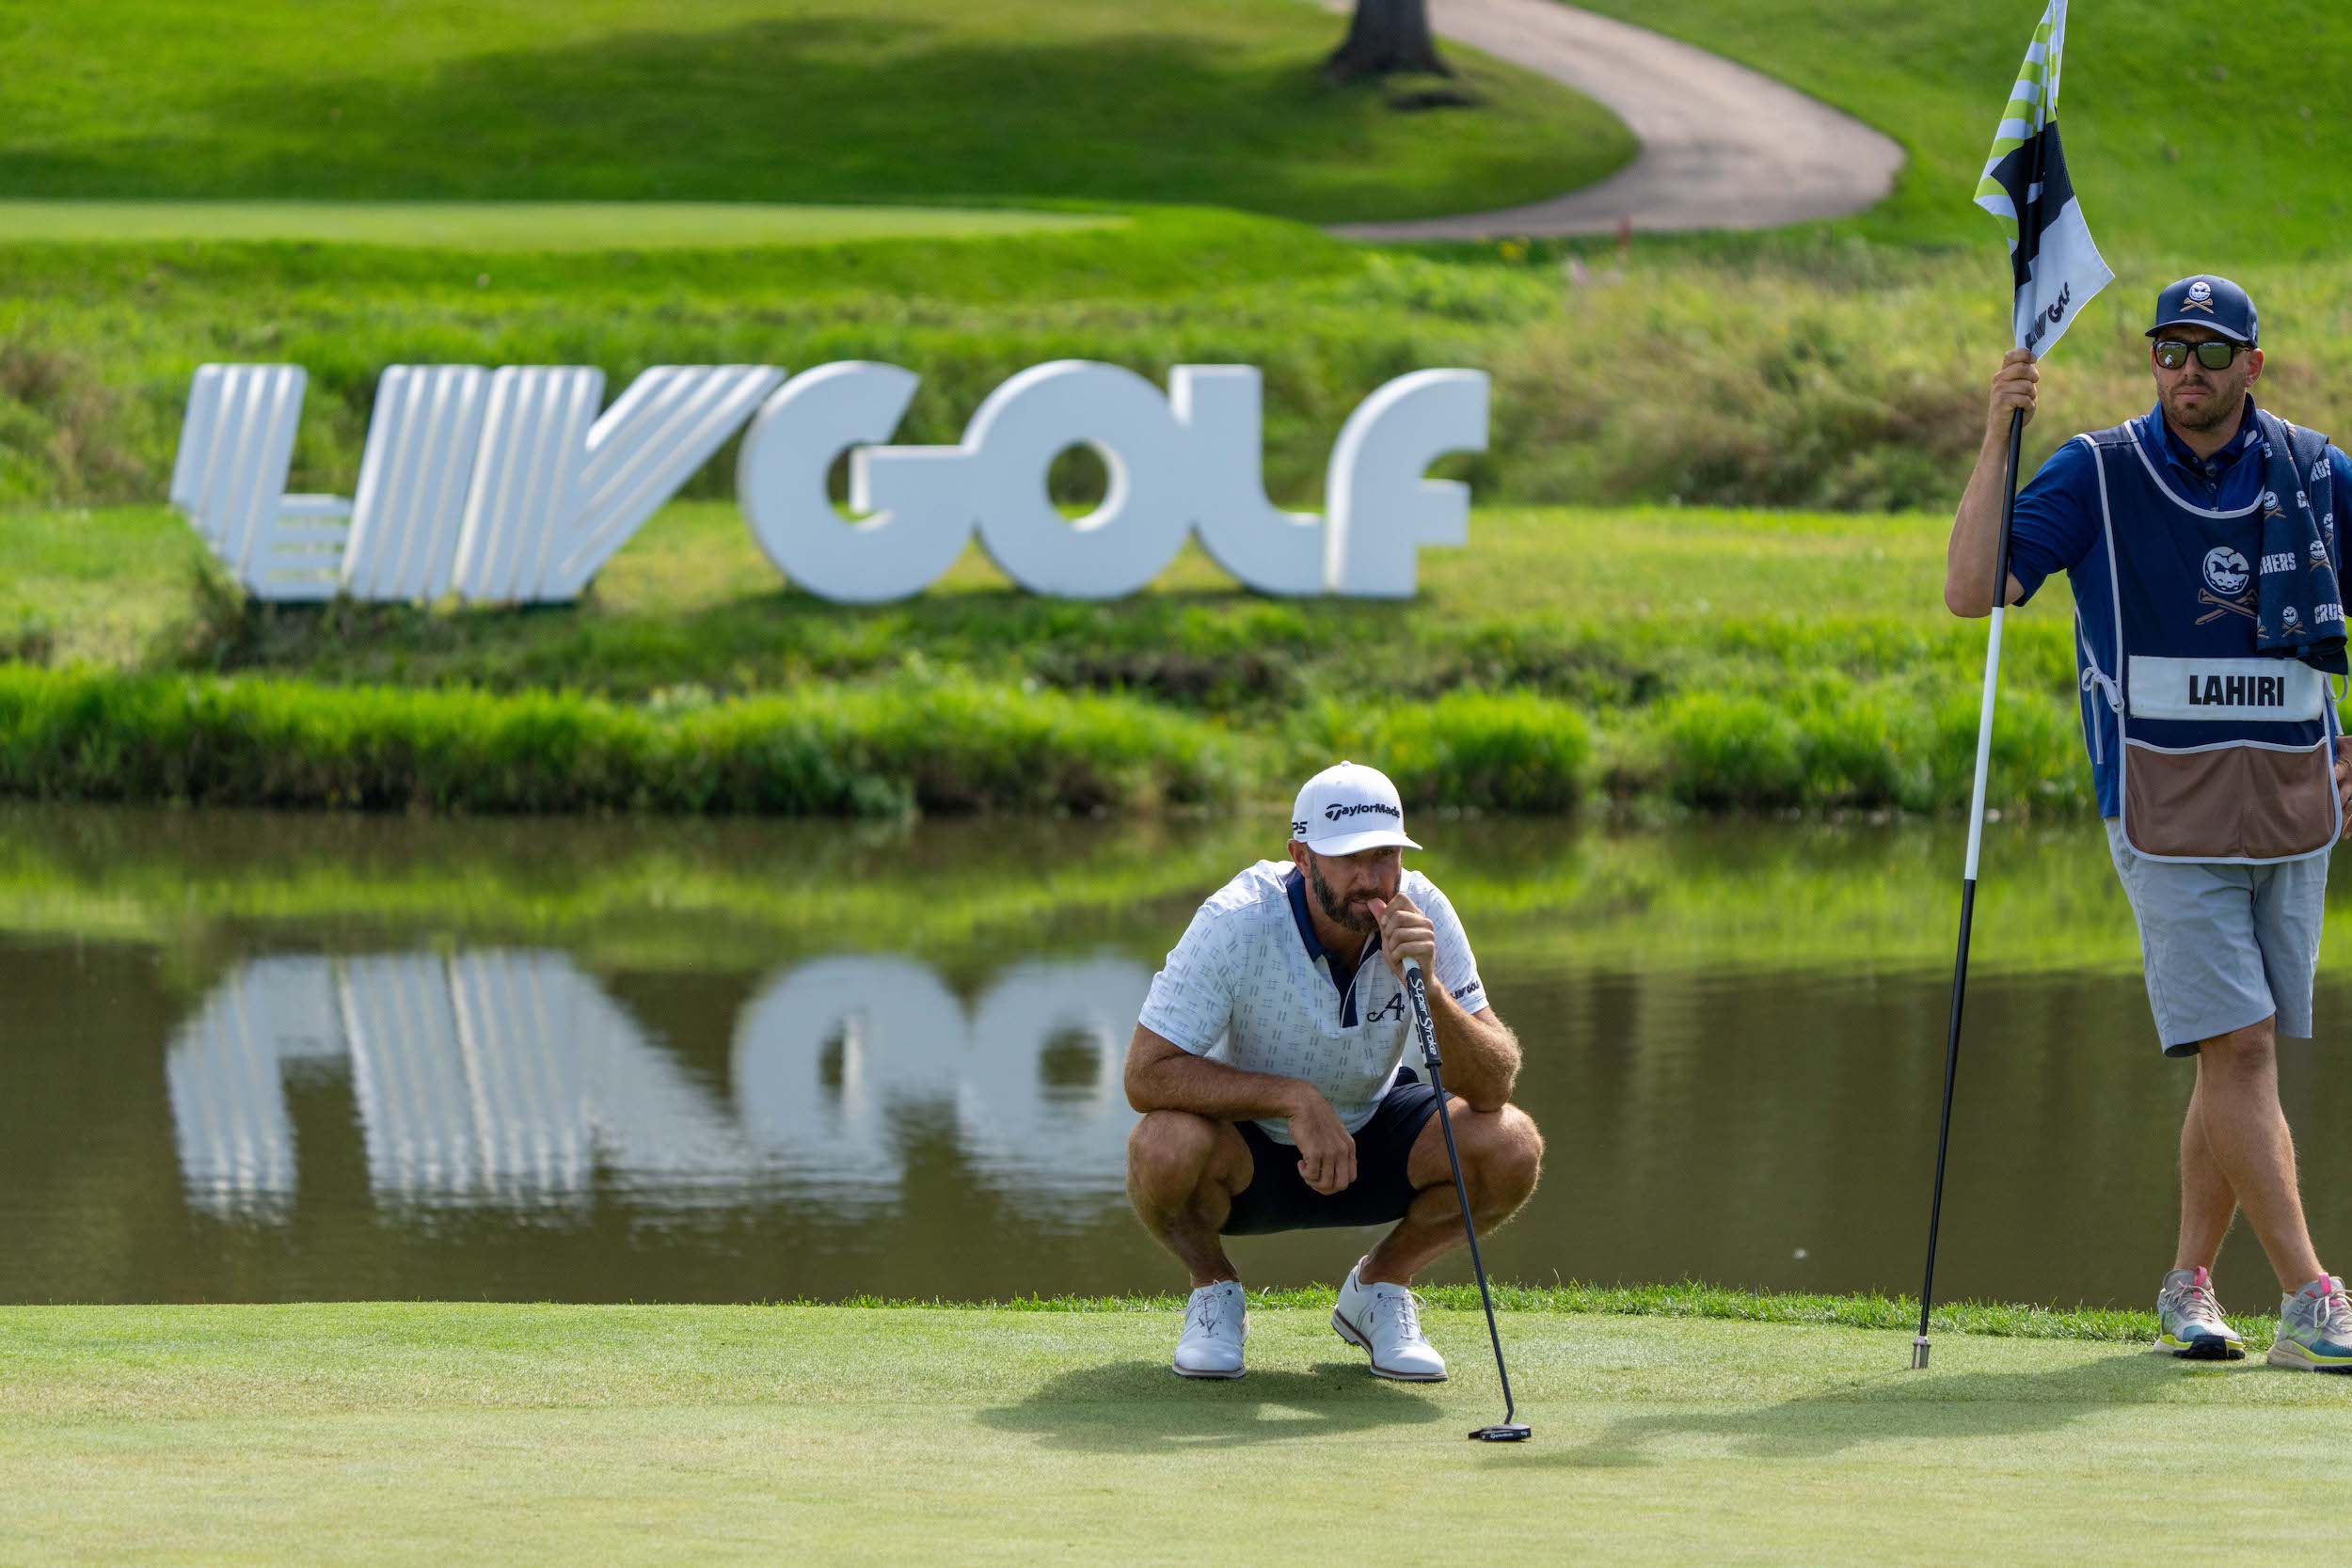 Dustin Johnson crouches on the green during a LIV Golf event, with a large "LIV GOLF" sign in the background. He is wearing shorts.